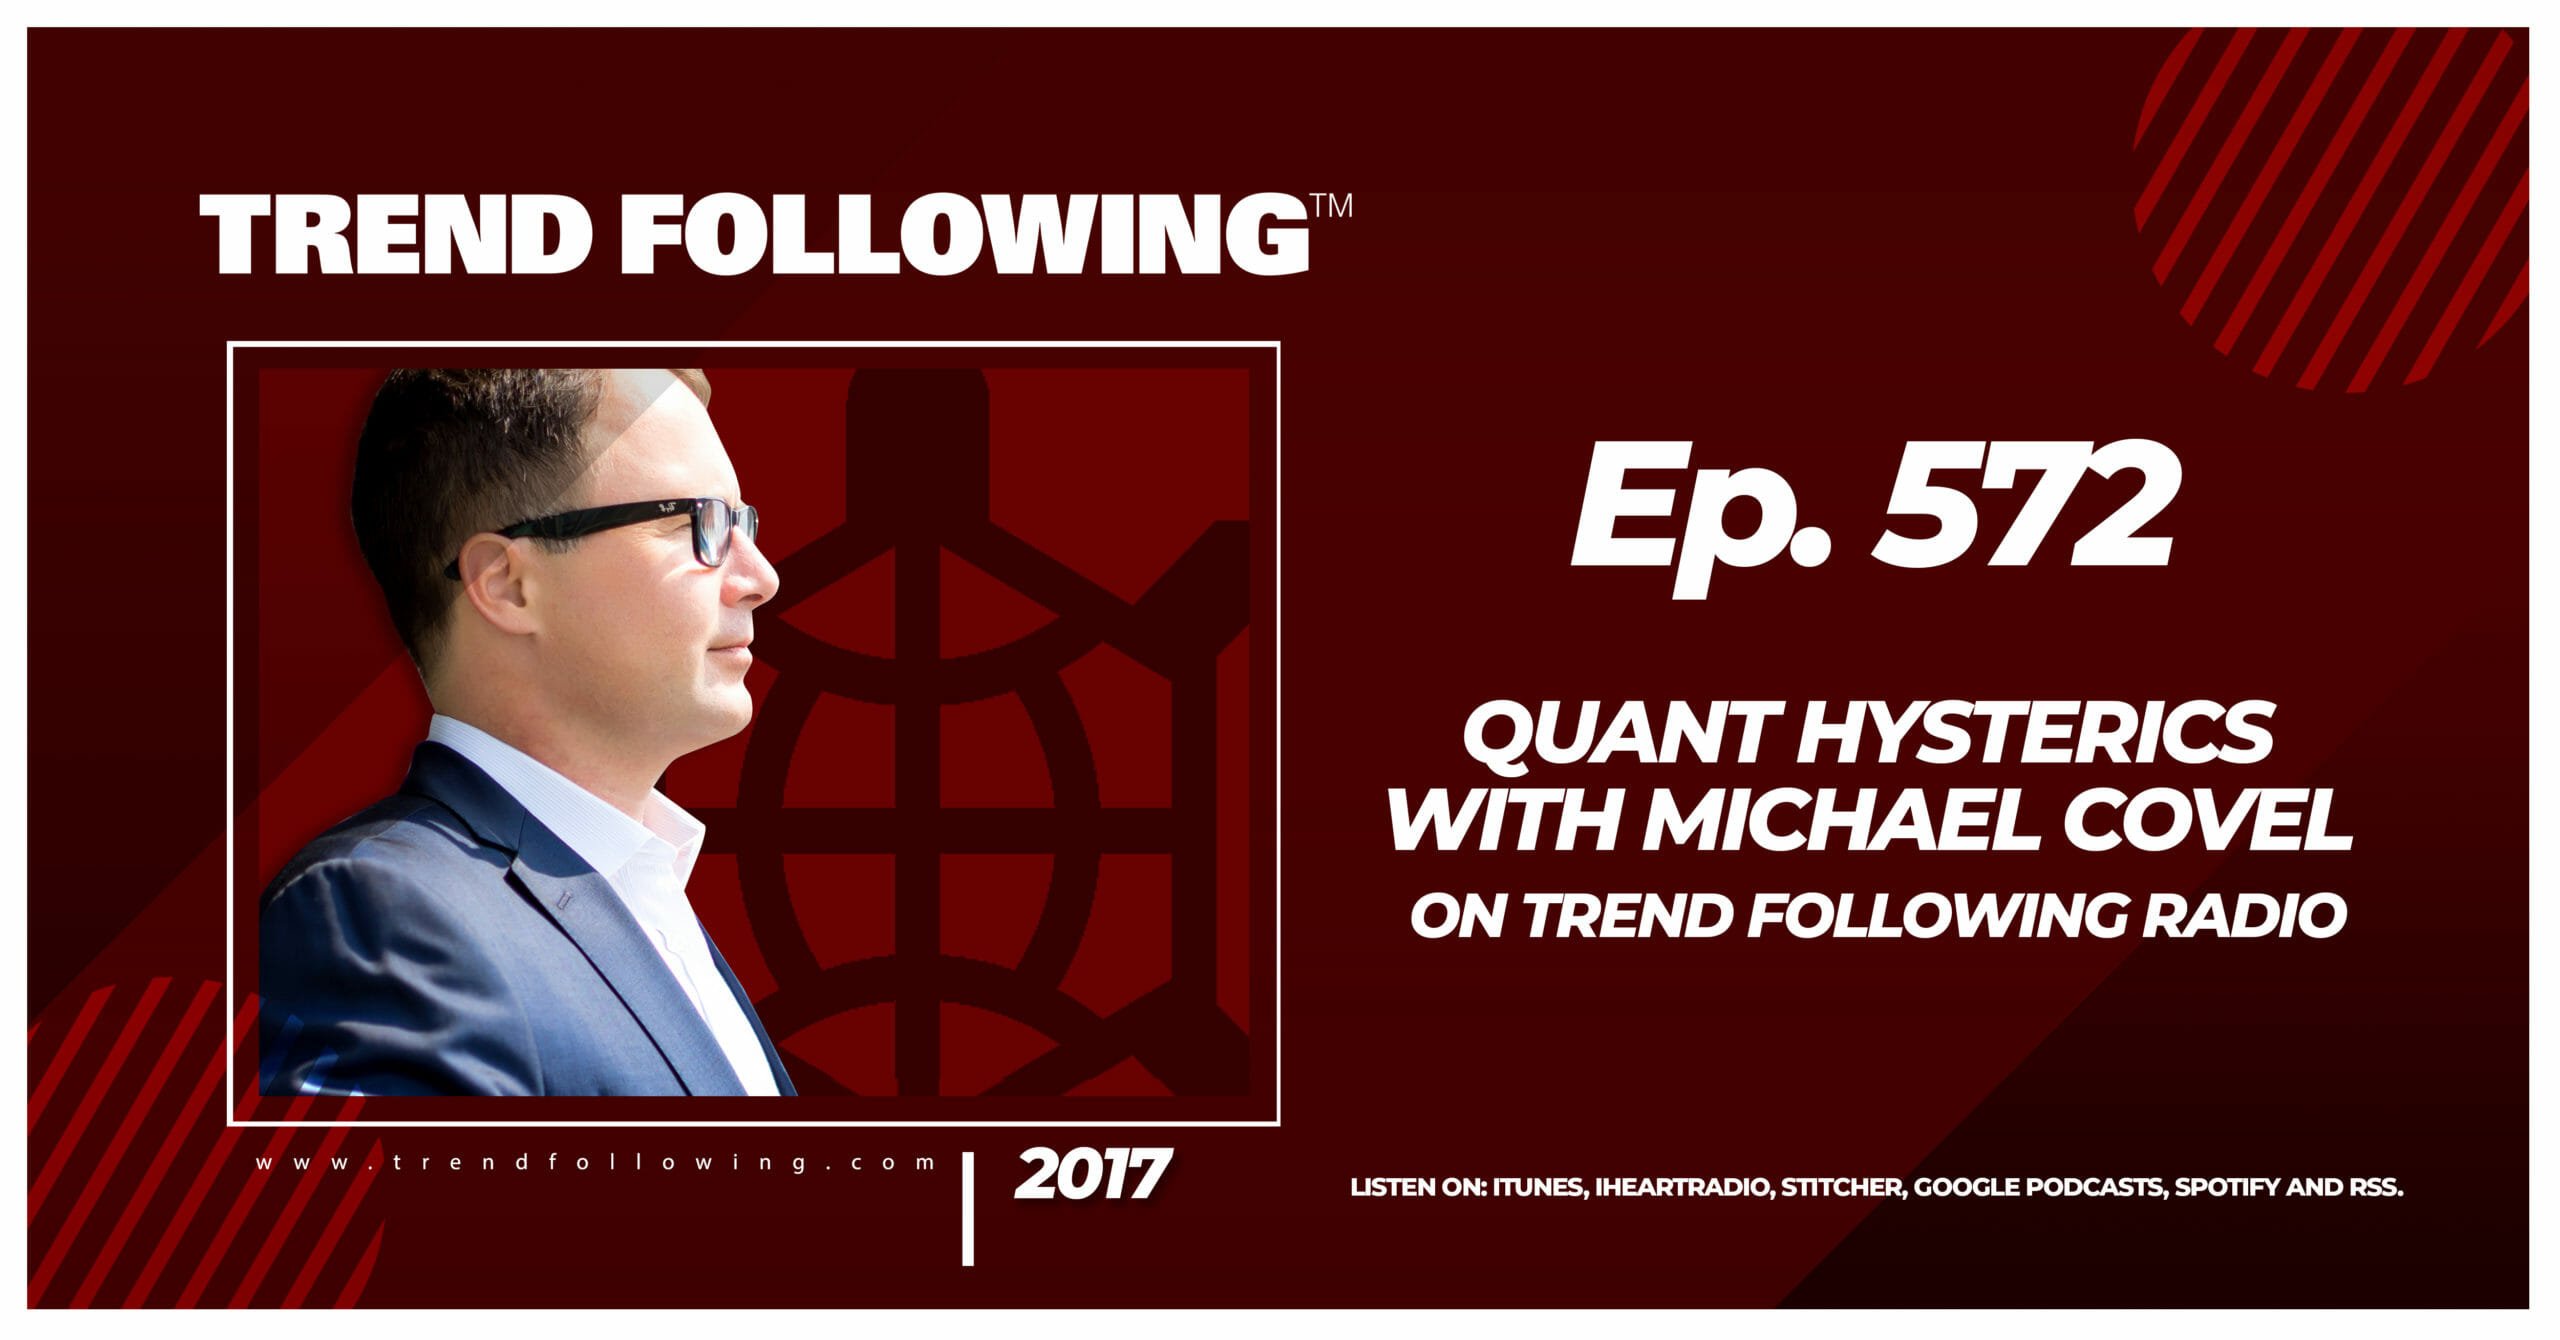 Quant Hysterics with Michael Covel on Trend Following Radio